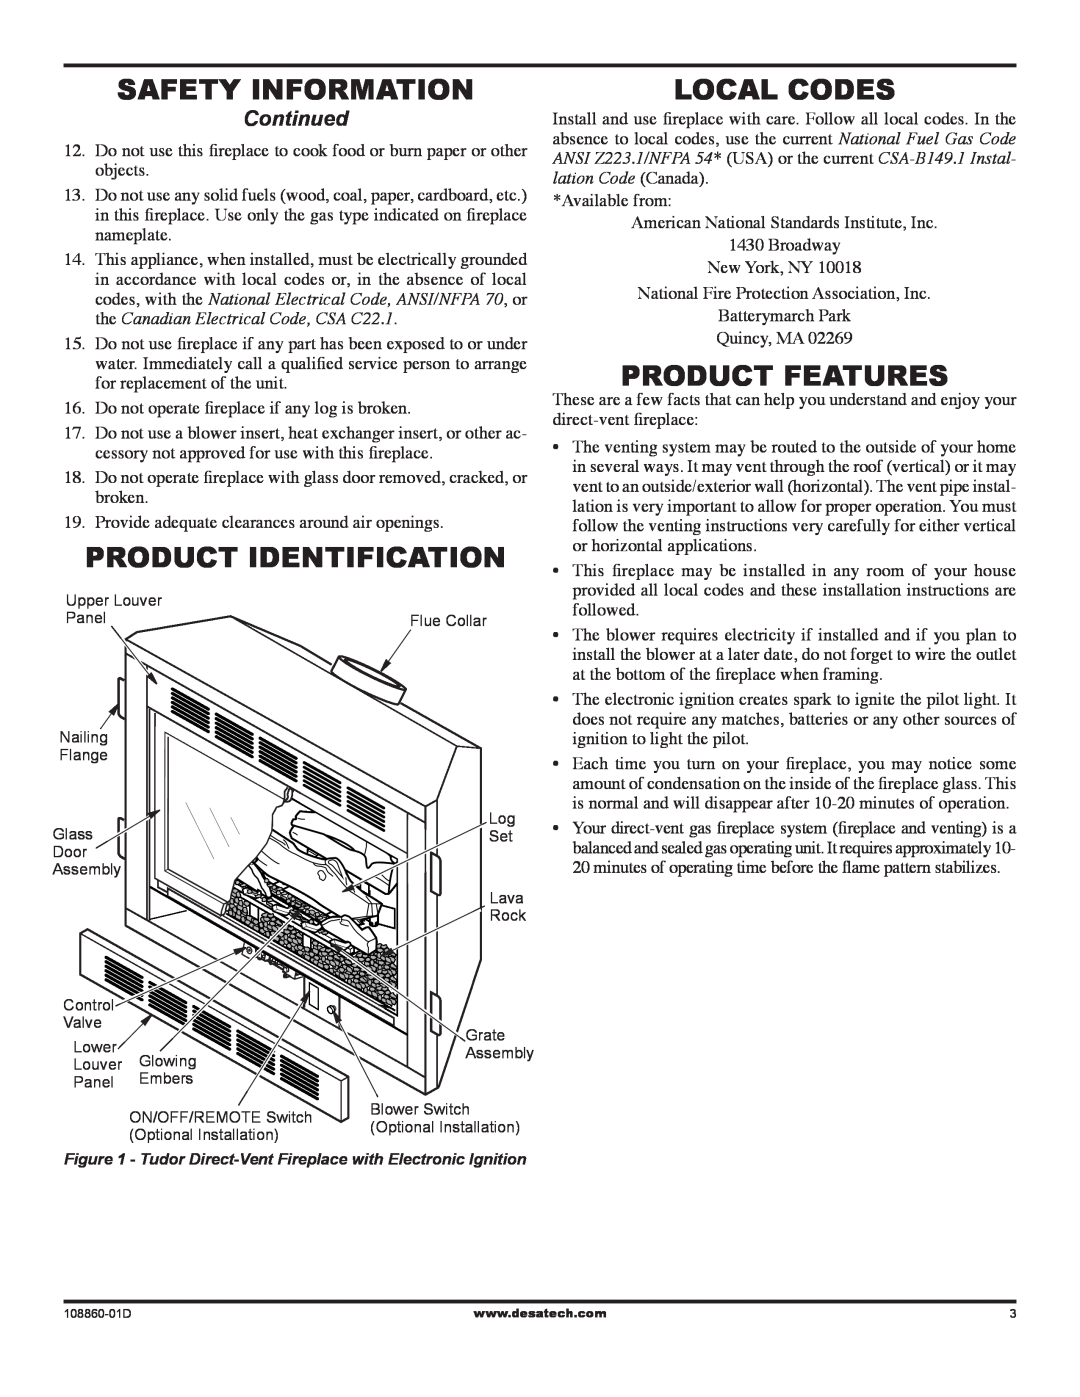 Desa (V)T32EN installation manual Safety information, Product Identification, Local Codes, Product Features, Continued 